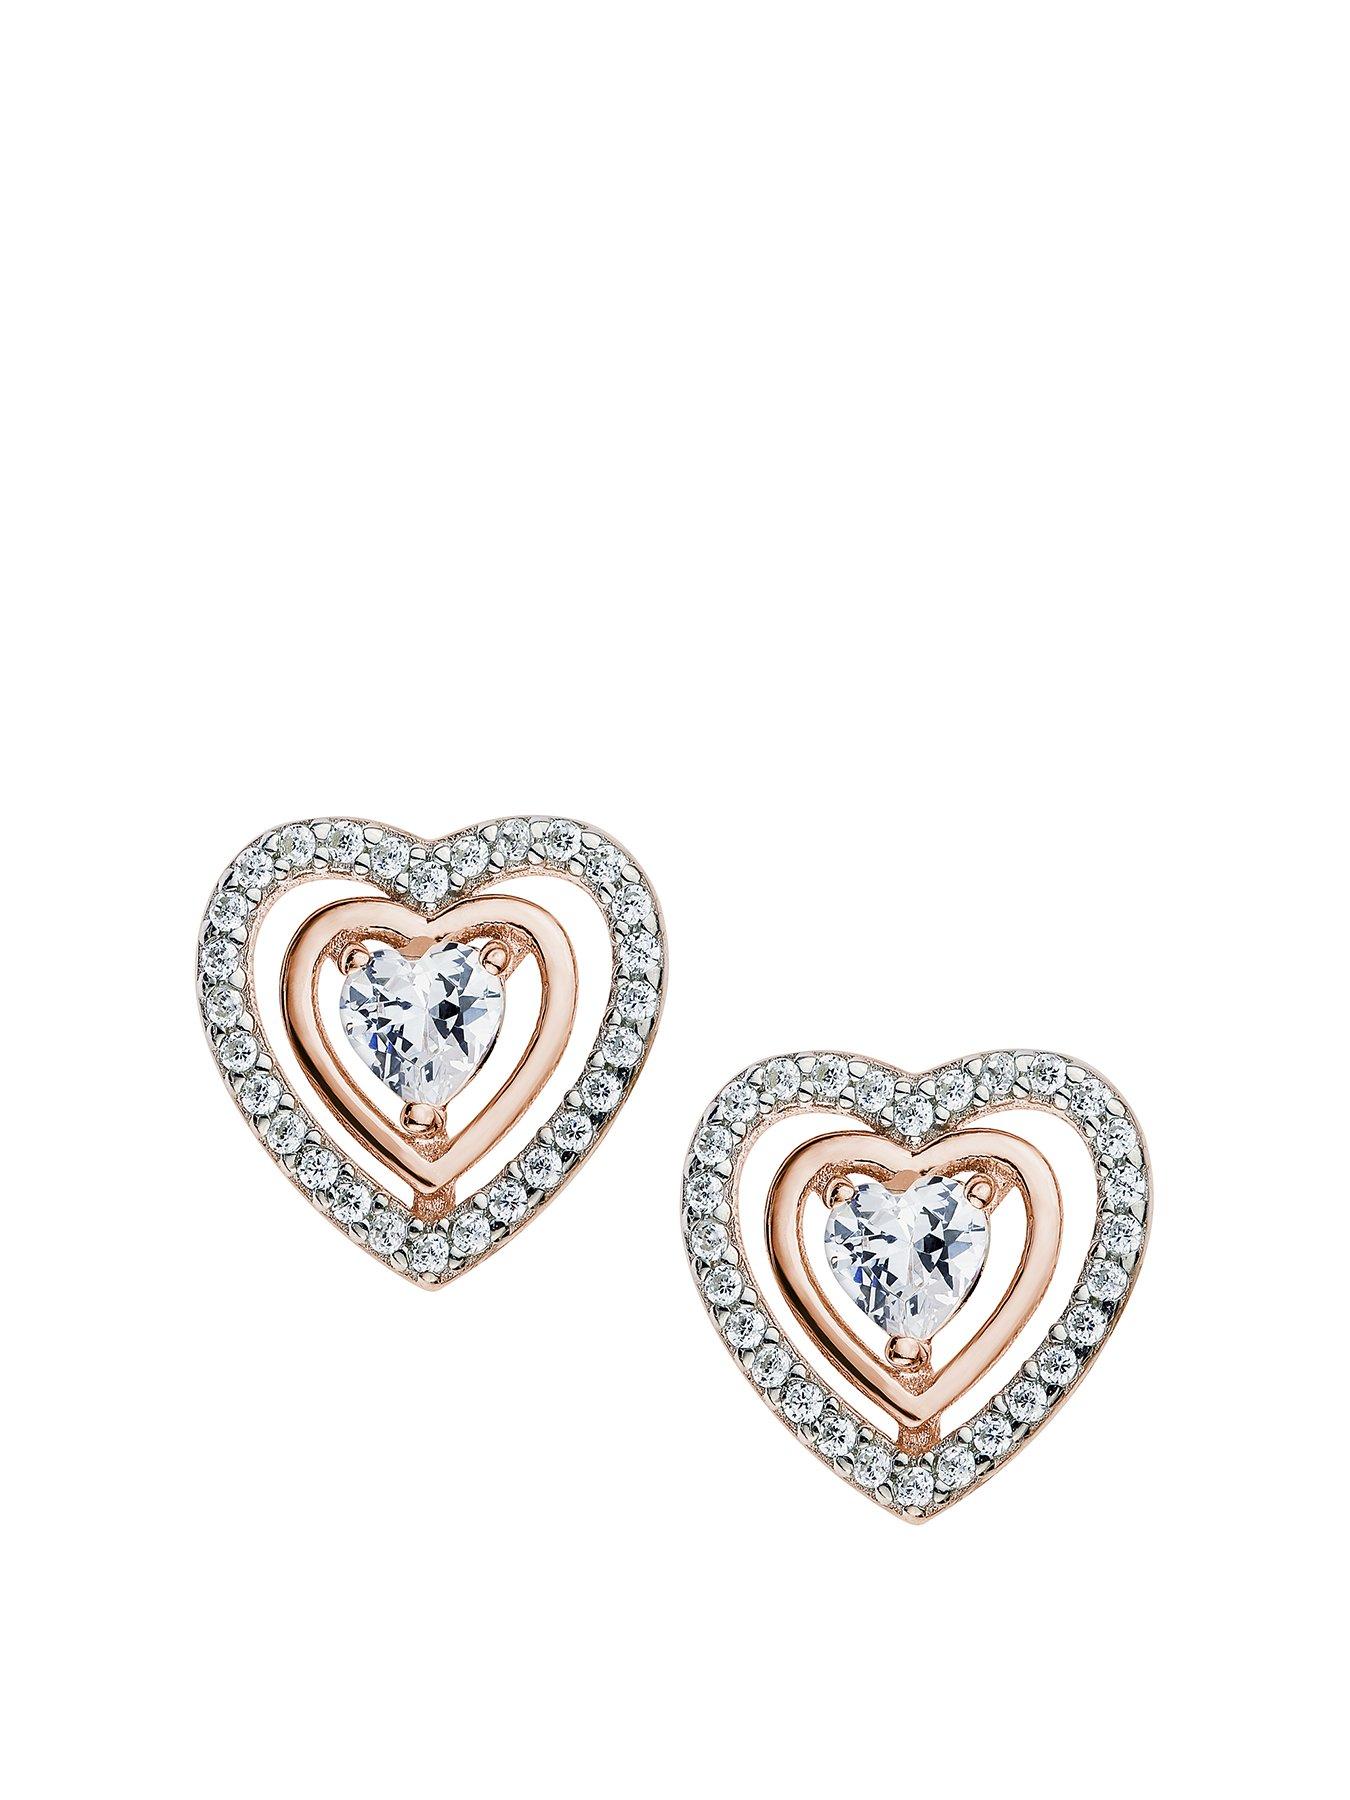 Jewellery & watches Rose Gold And Rhodium Plated Sterling Silver White Cubic Zirconia Heart Stud Earrings